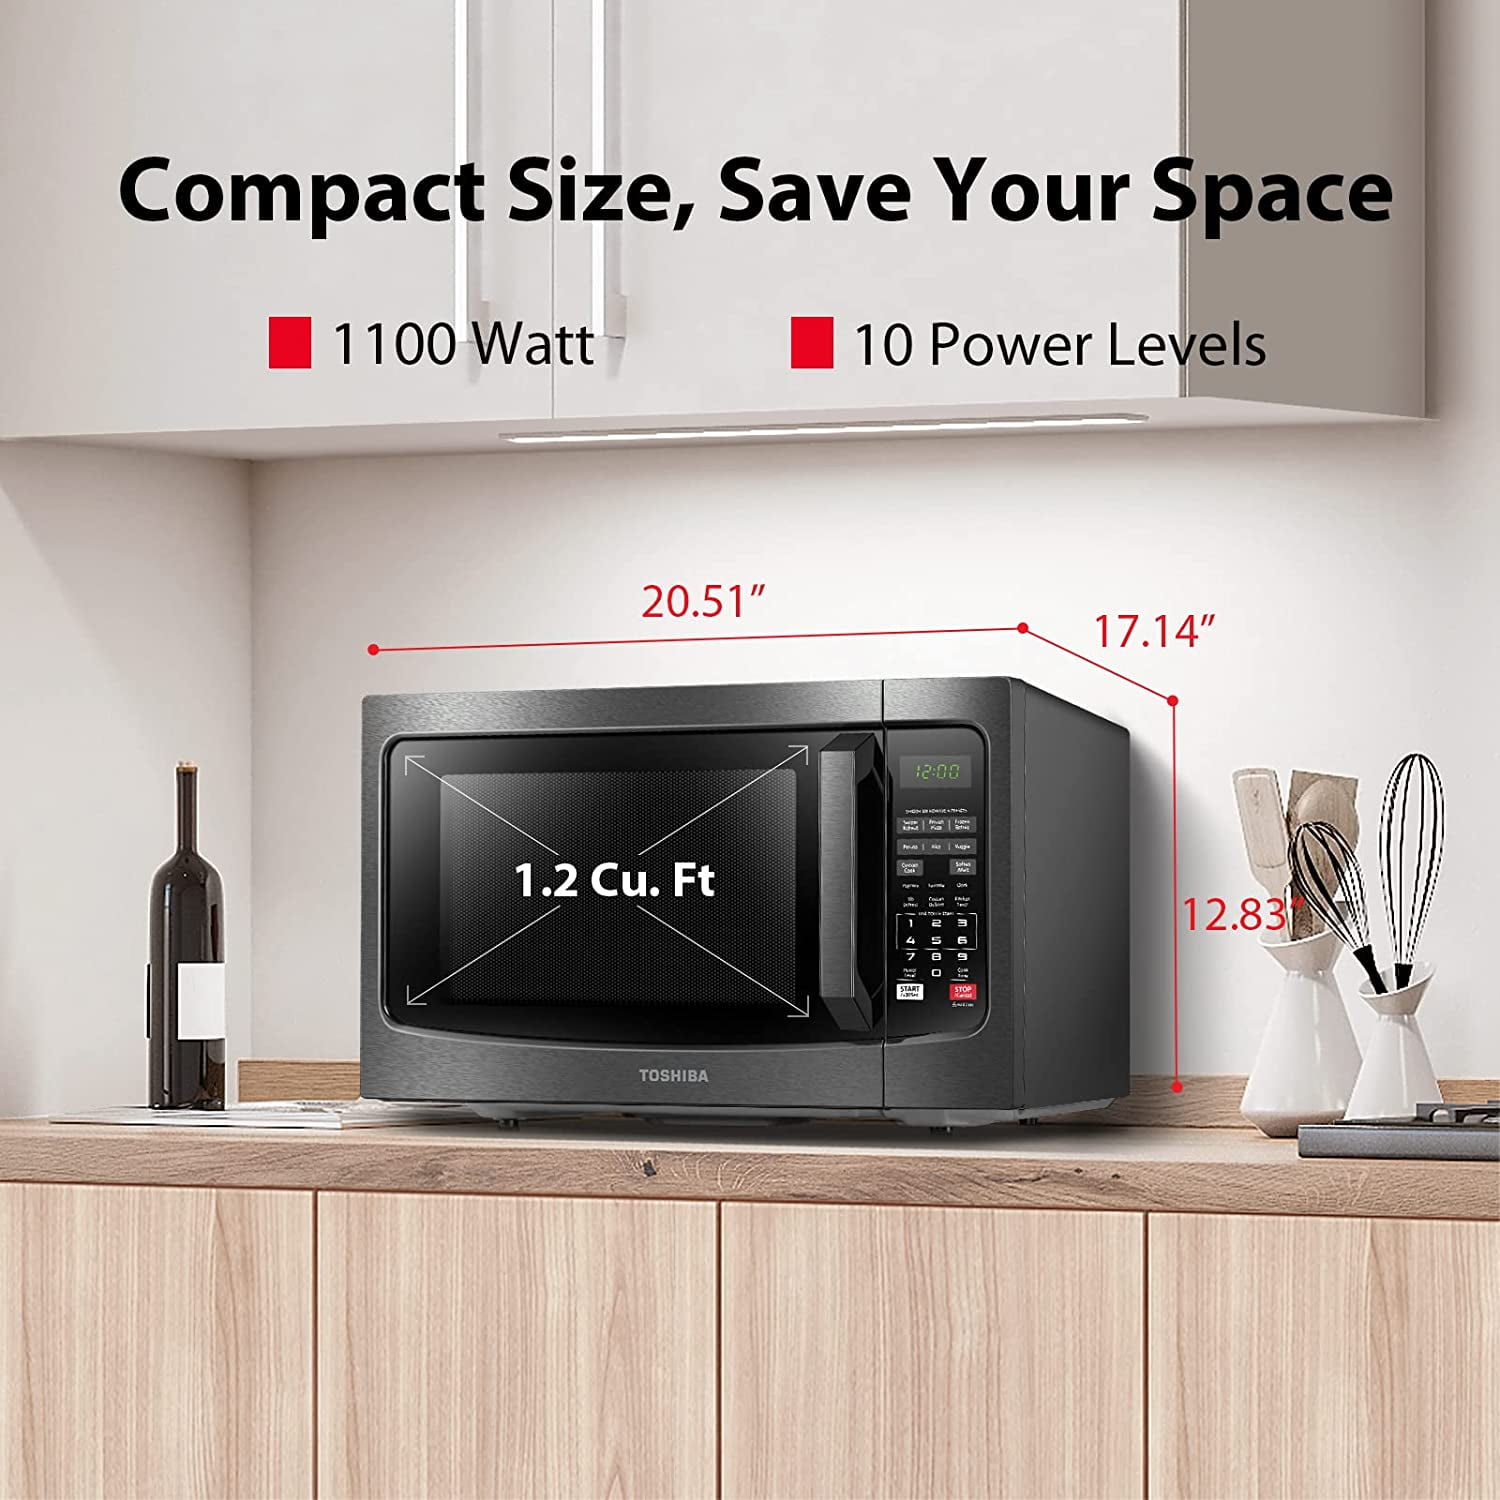 Toshiba ML-EM45PIT(SS) Microwave Oven with Inverter Technology, LCD Display and Smart Sensor, 1.6 cu.ft, Stainless Steel